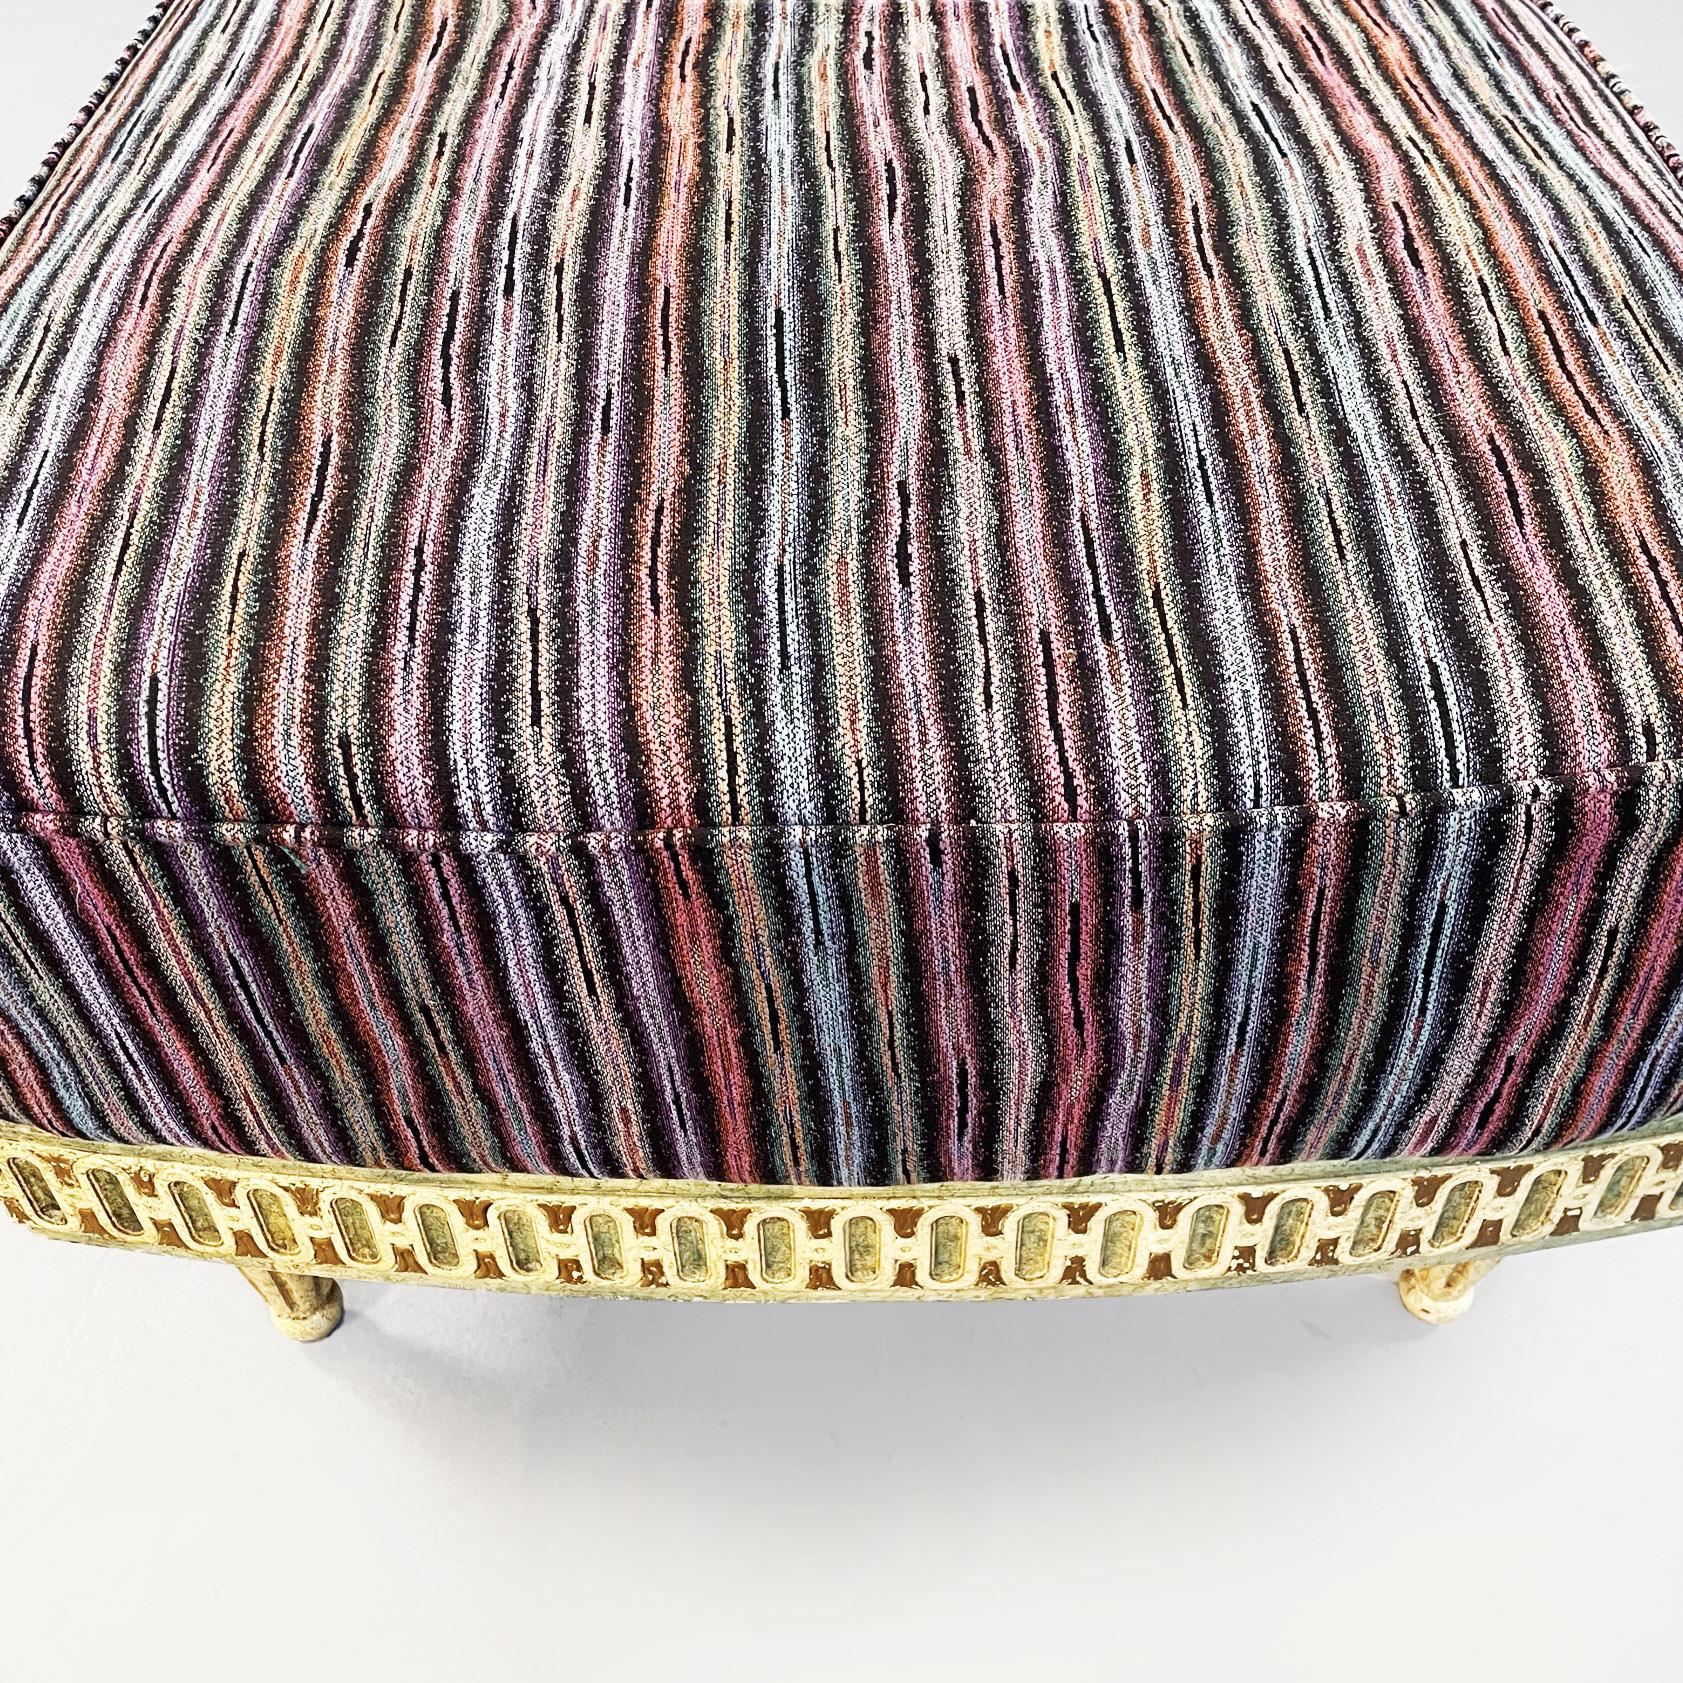 Italian Midcentury Venetian Style Chaise Longue with Missoni Striped Fabric, 1950 For Sale 6